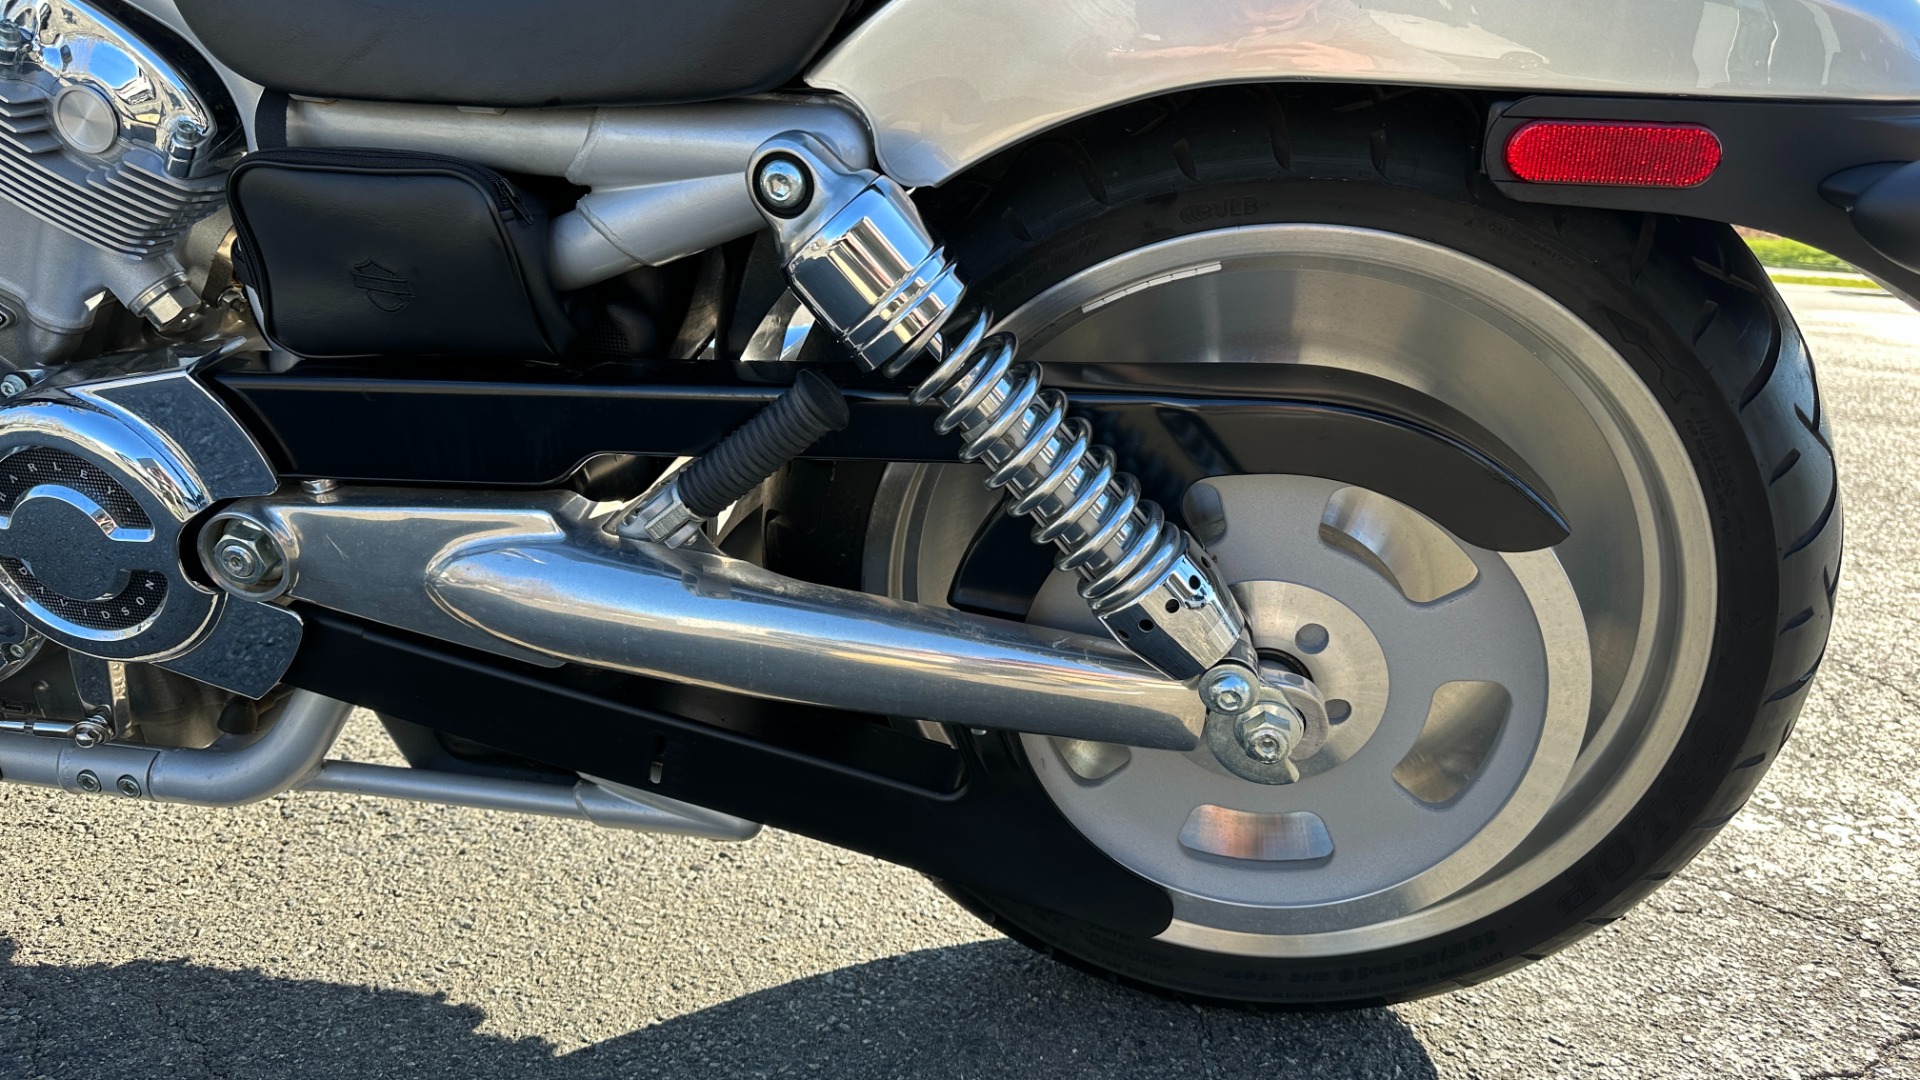 Used 2003 Harley Davidson V Rod ANNIVERSARY EDITION / 1130CC ENGINE / BREMBO BRAKES / VORTEX AIR SCOOPS for sale $7,695 at Formula Imports in Charlotte NC 28227 6